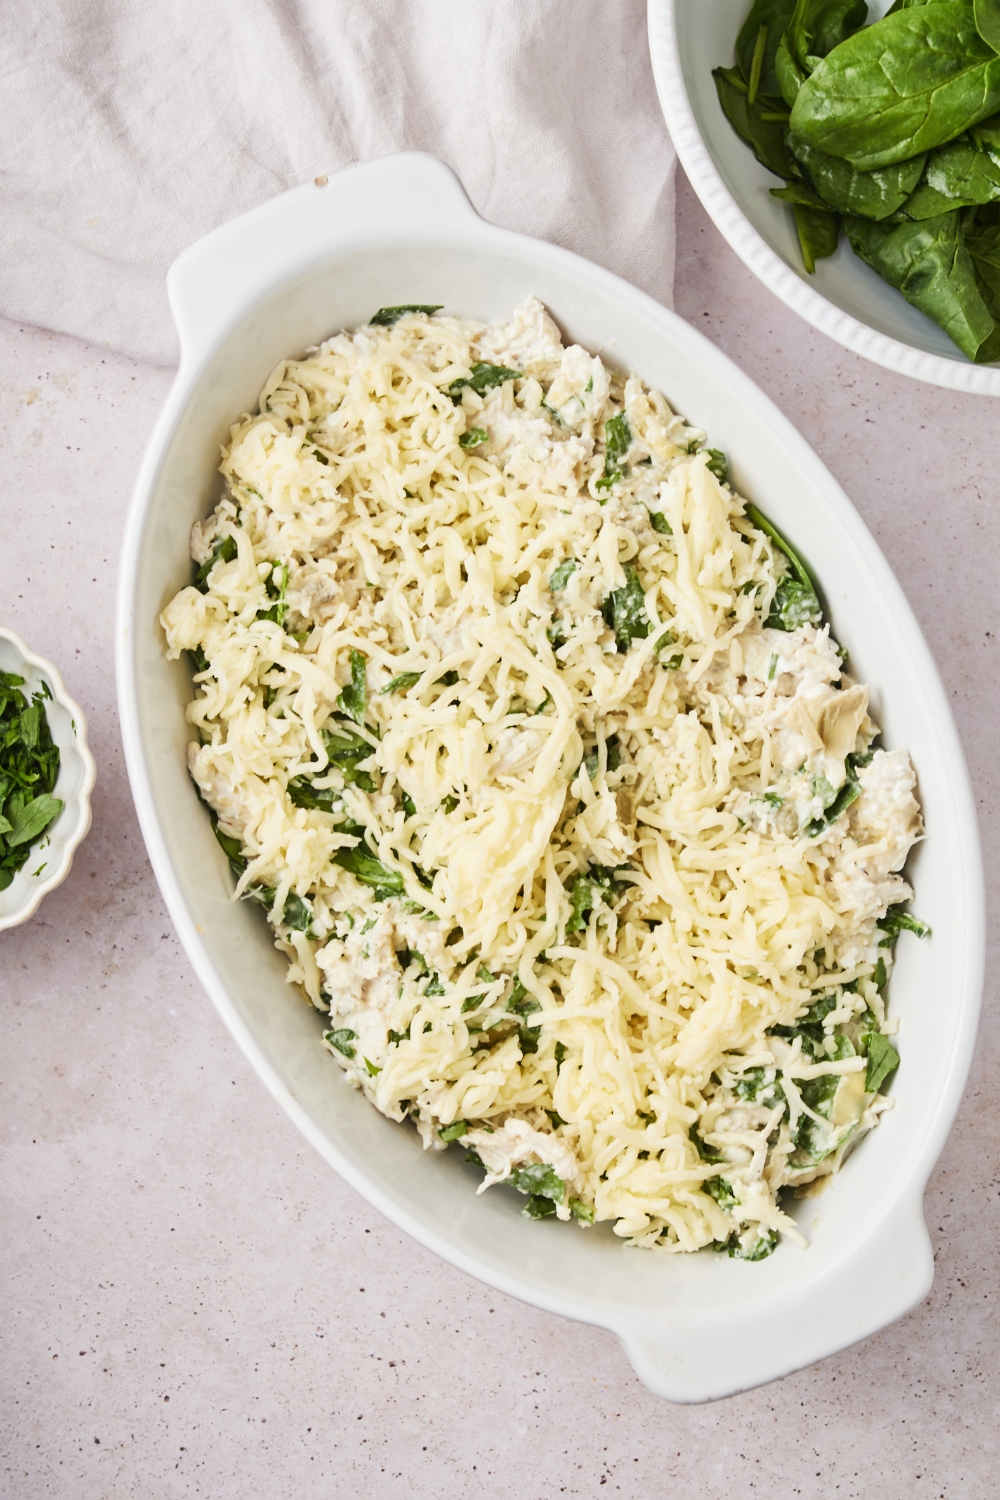 A baking dish filled with unbaked spinach chicken artichoke casserole covered in shredded cheese.